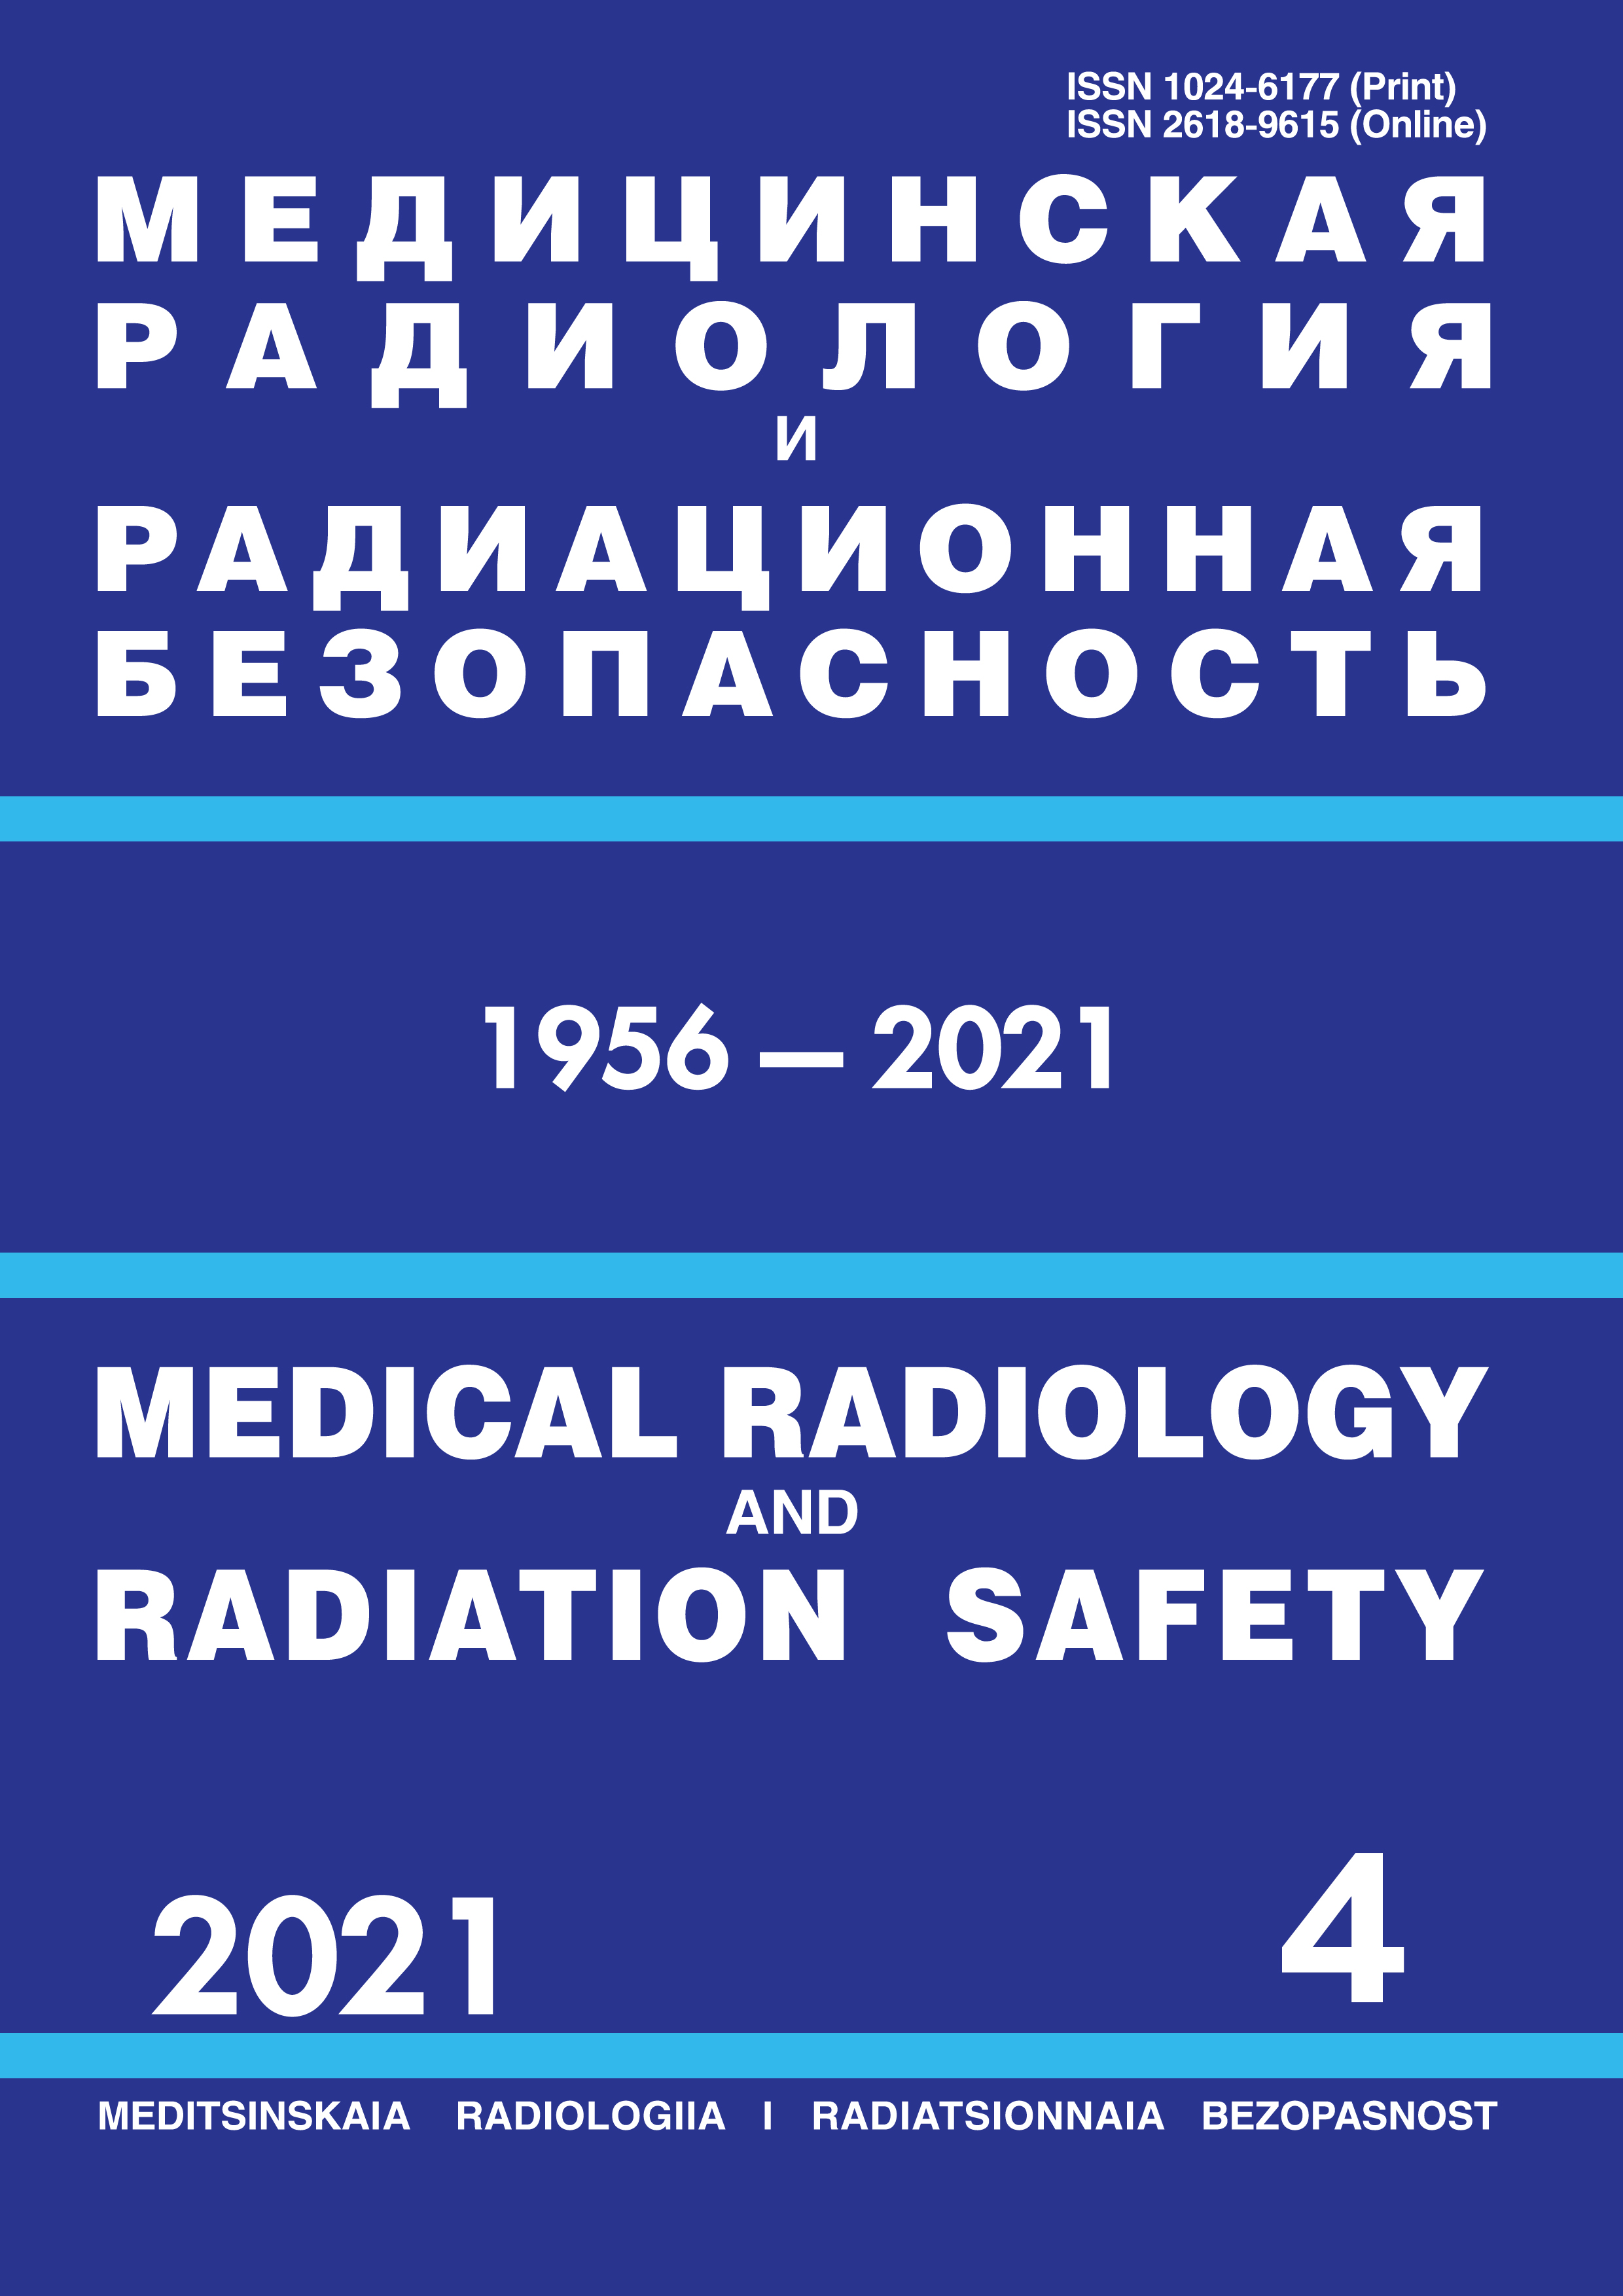                         Results of the Activities of Interdepartmental Expert Advice  on Establishing Communication Diseases, Disabilities and Death  with Impact Radiation Factors
            